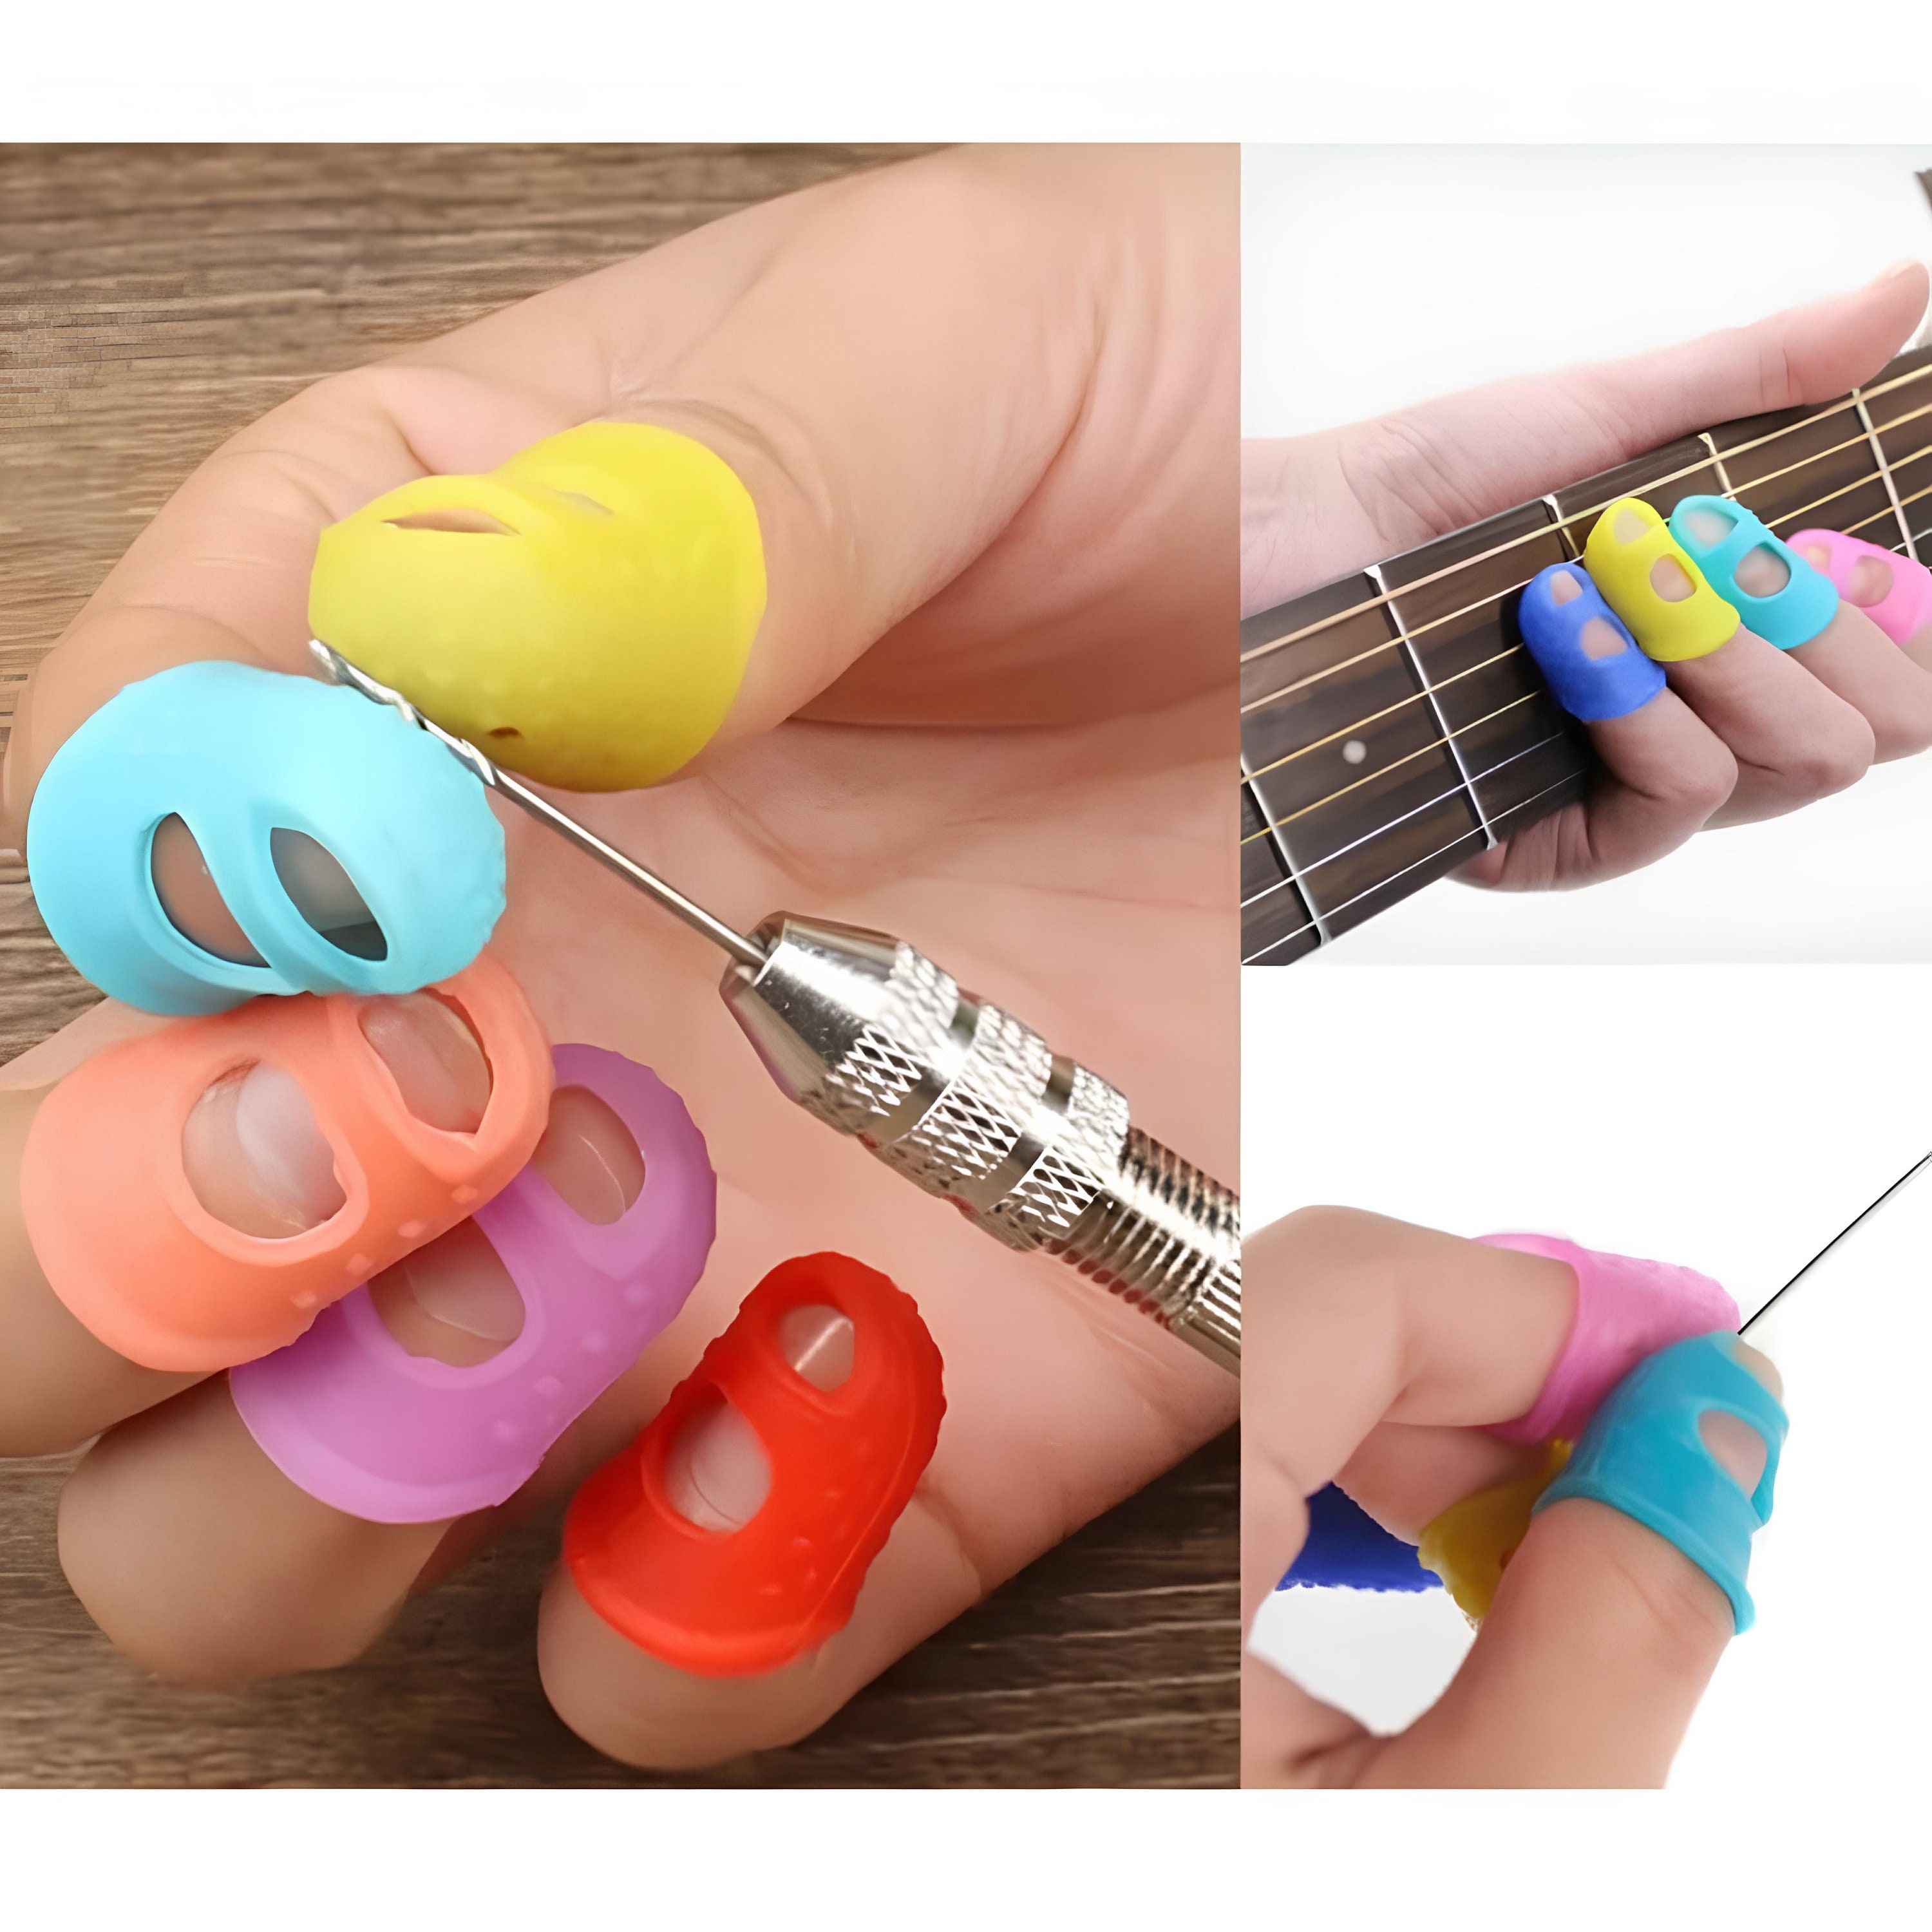 Mothinessto Silicone Fingers Tip Pads, Reusable Easy To Wear